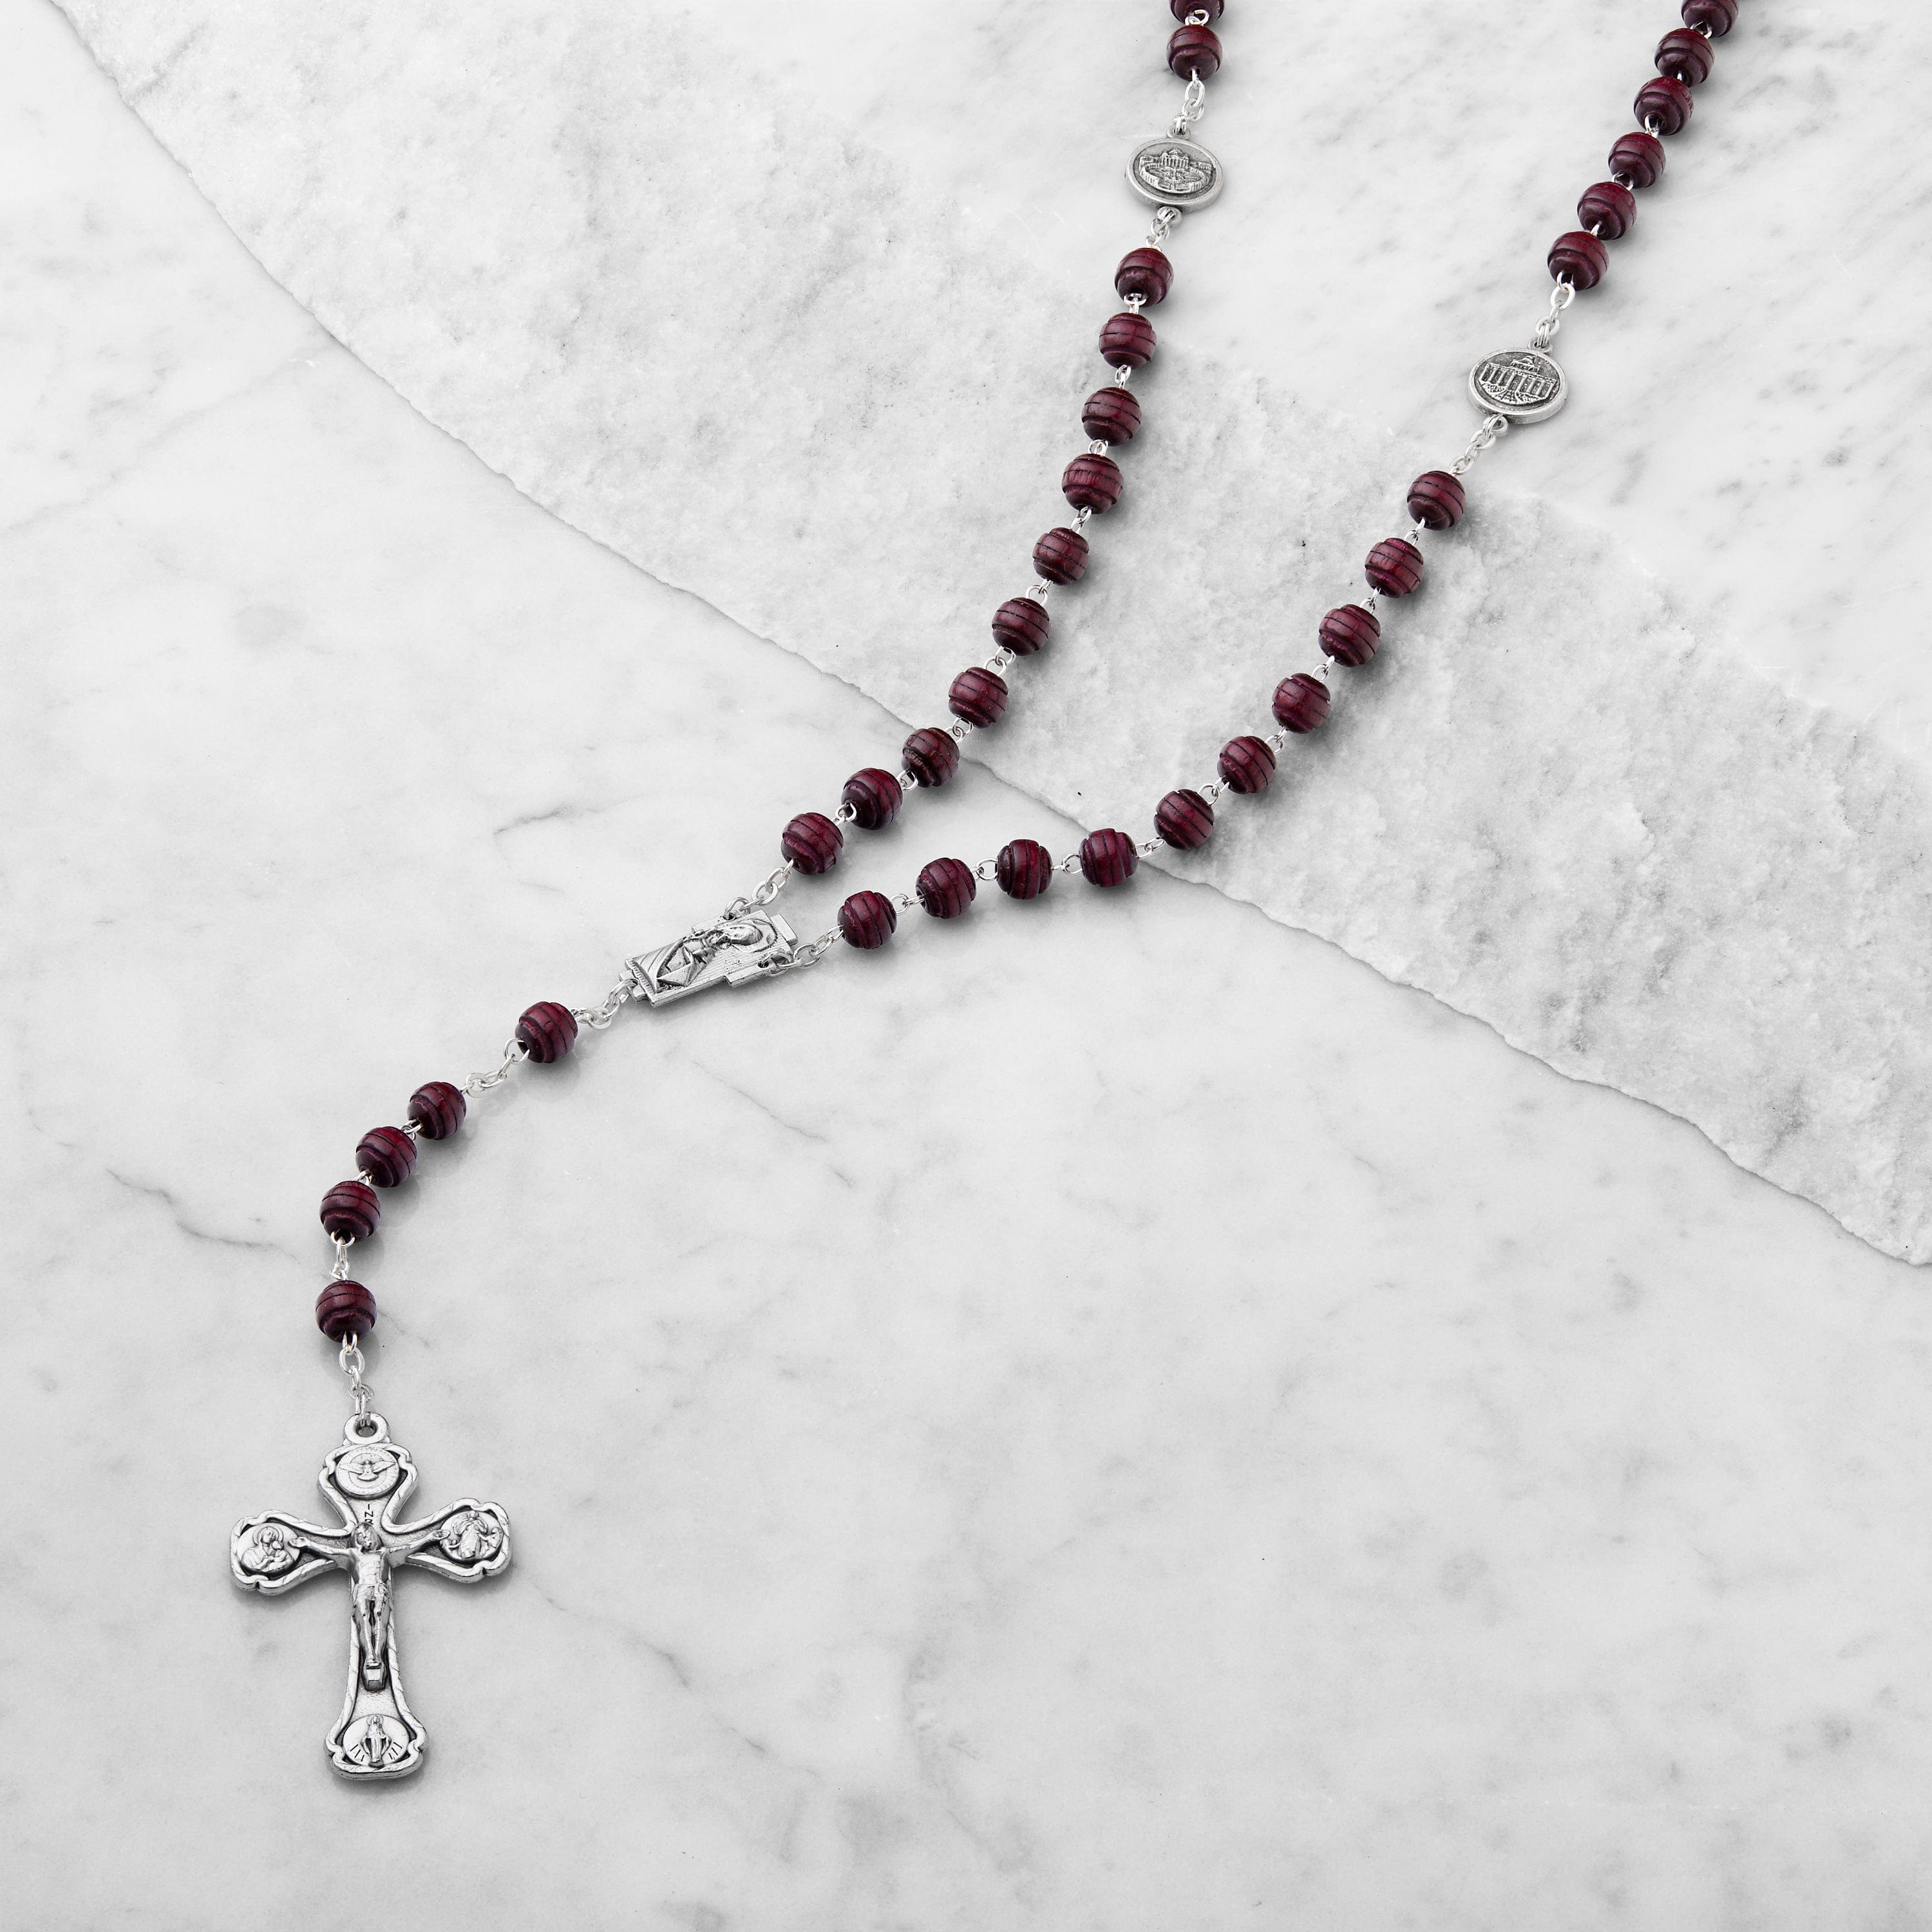 Round Wooden Rosary Beads with the Four Basilicas | MONDO CATTOLICO